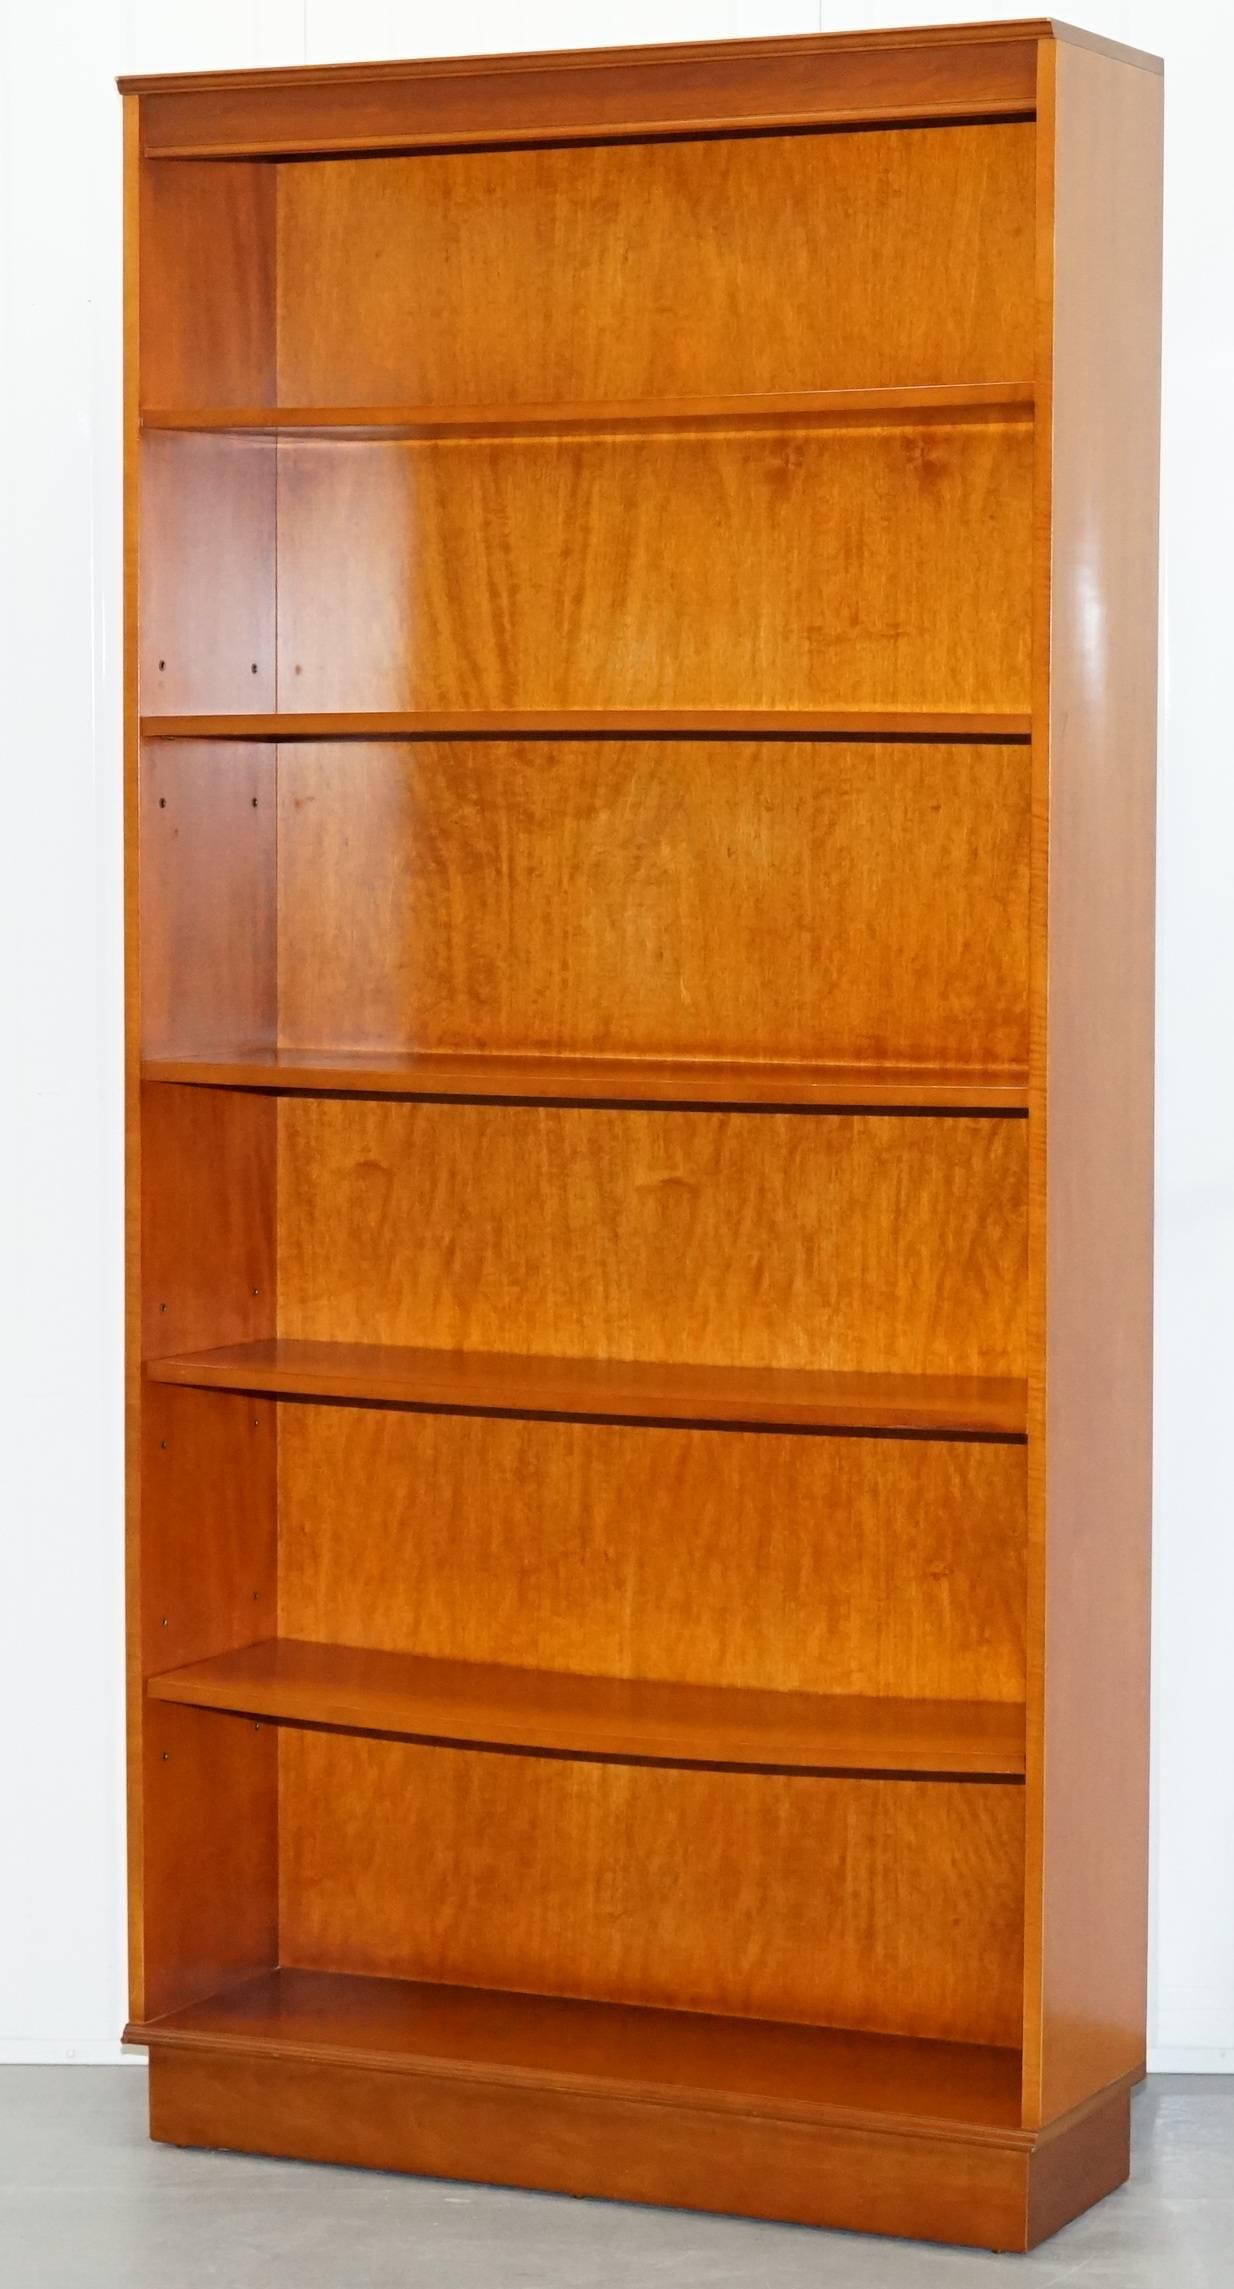 We are delighted to offer for sale this nice Beresford & Hicks light mahogany library bookcase

A well made piece in good used condition throughout, two of the shelves are bowed and they need stay in places as the pins for holding the shelves are